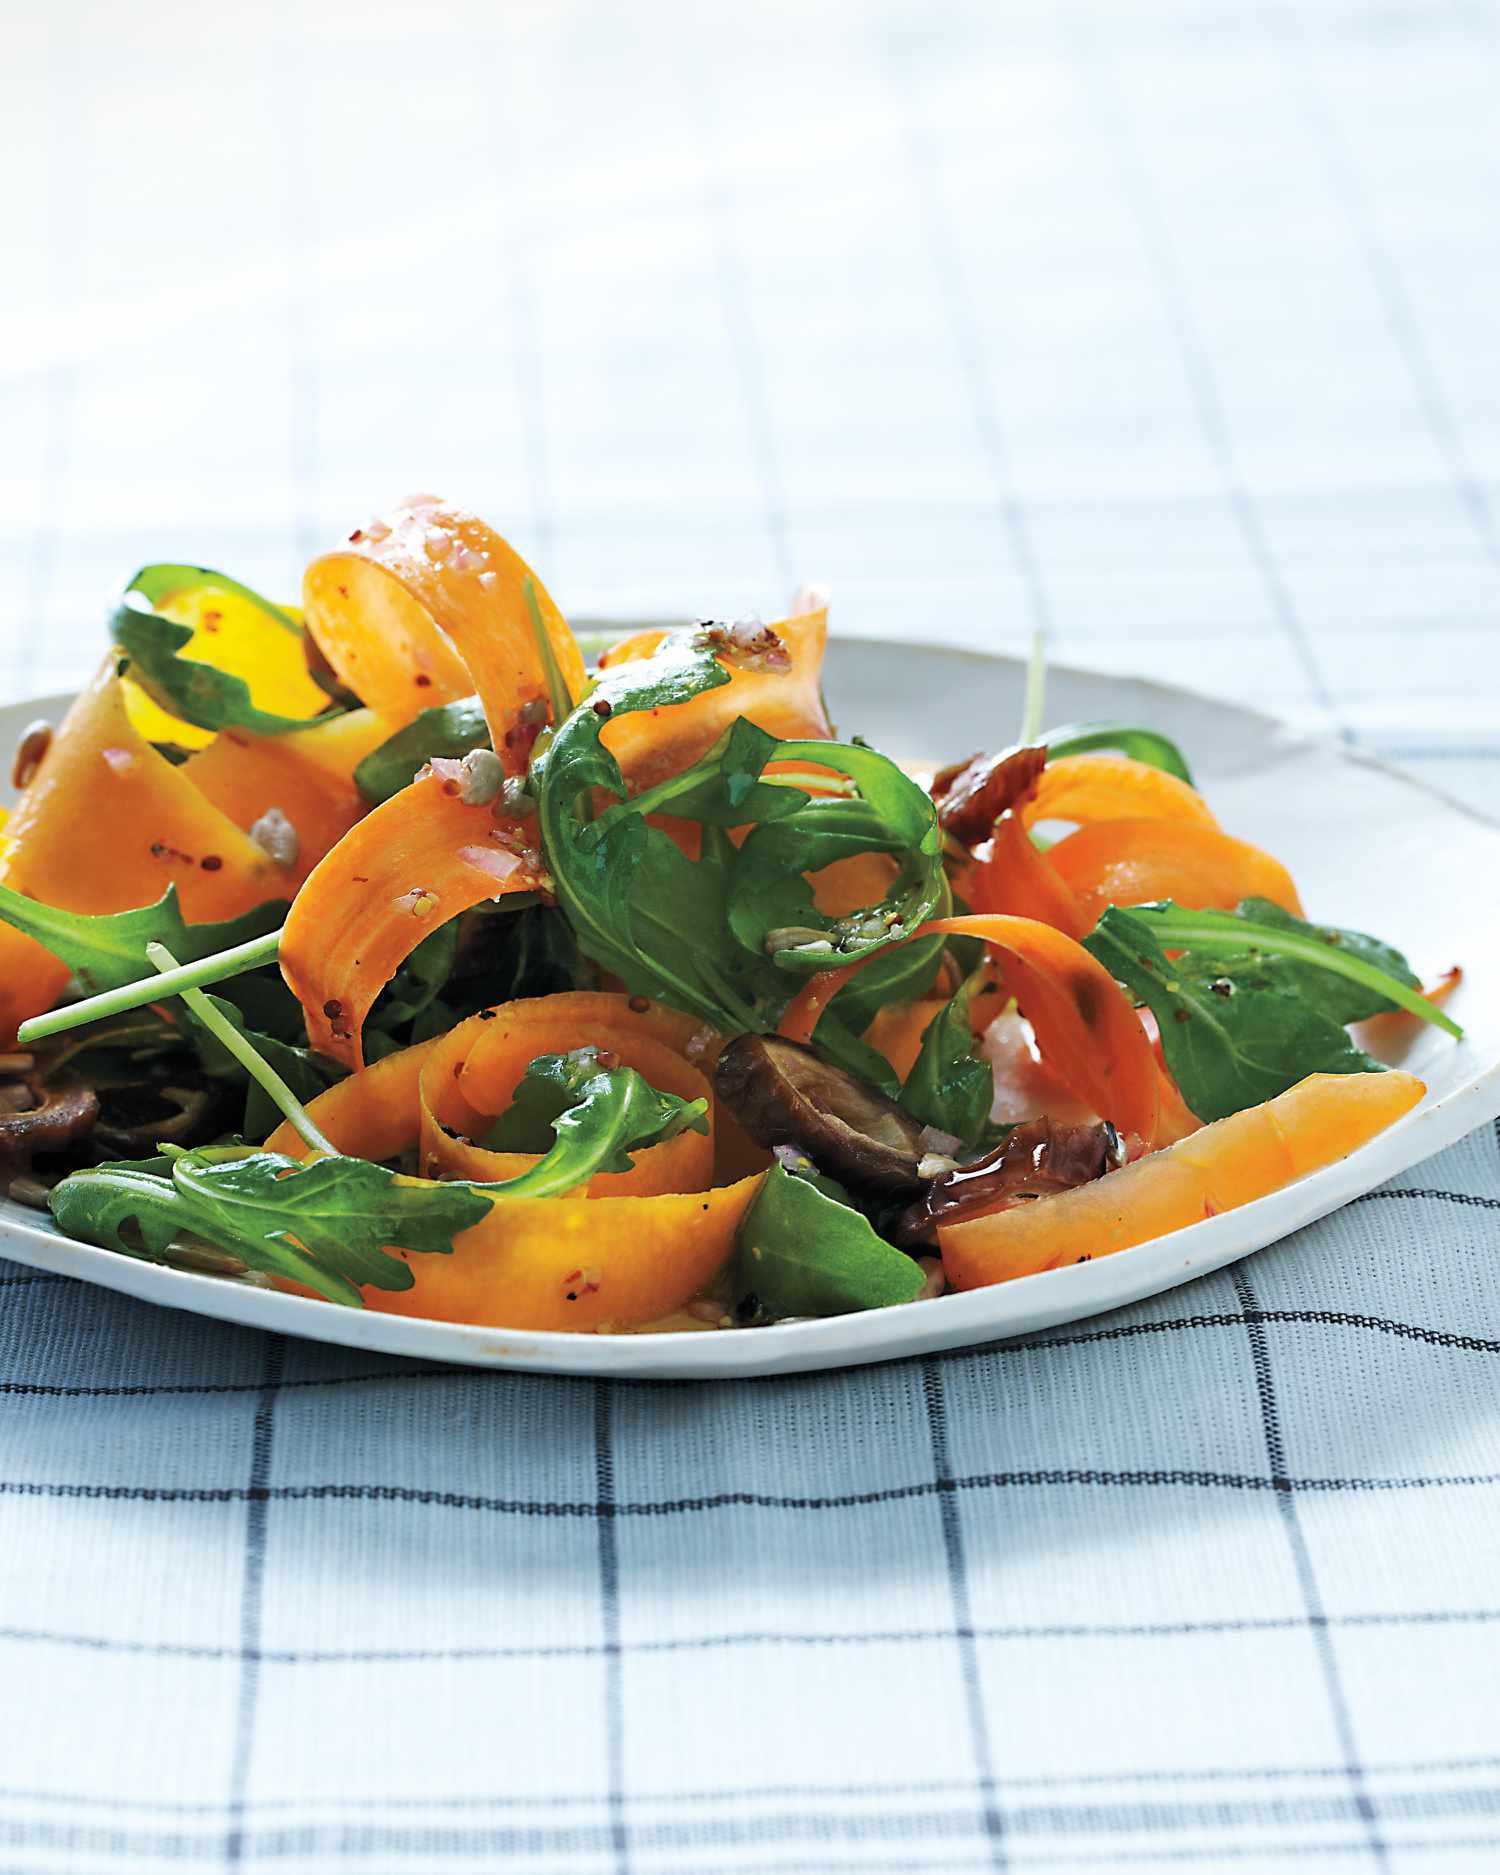 Shaved-Butternut-and-Carrot Salad with Dates and Sunflower Seeds